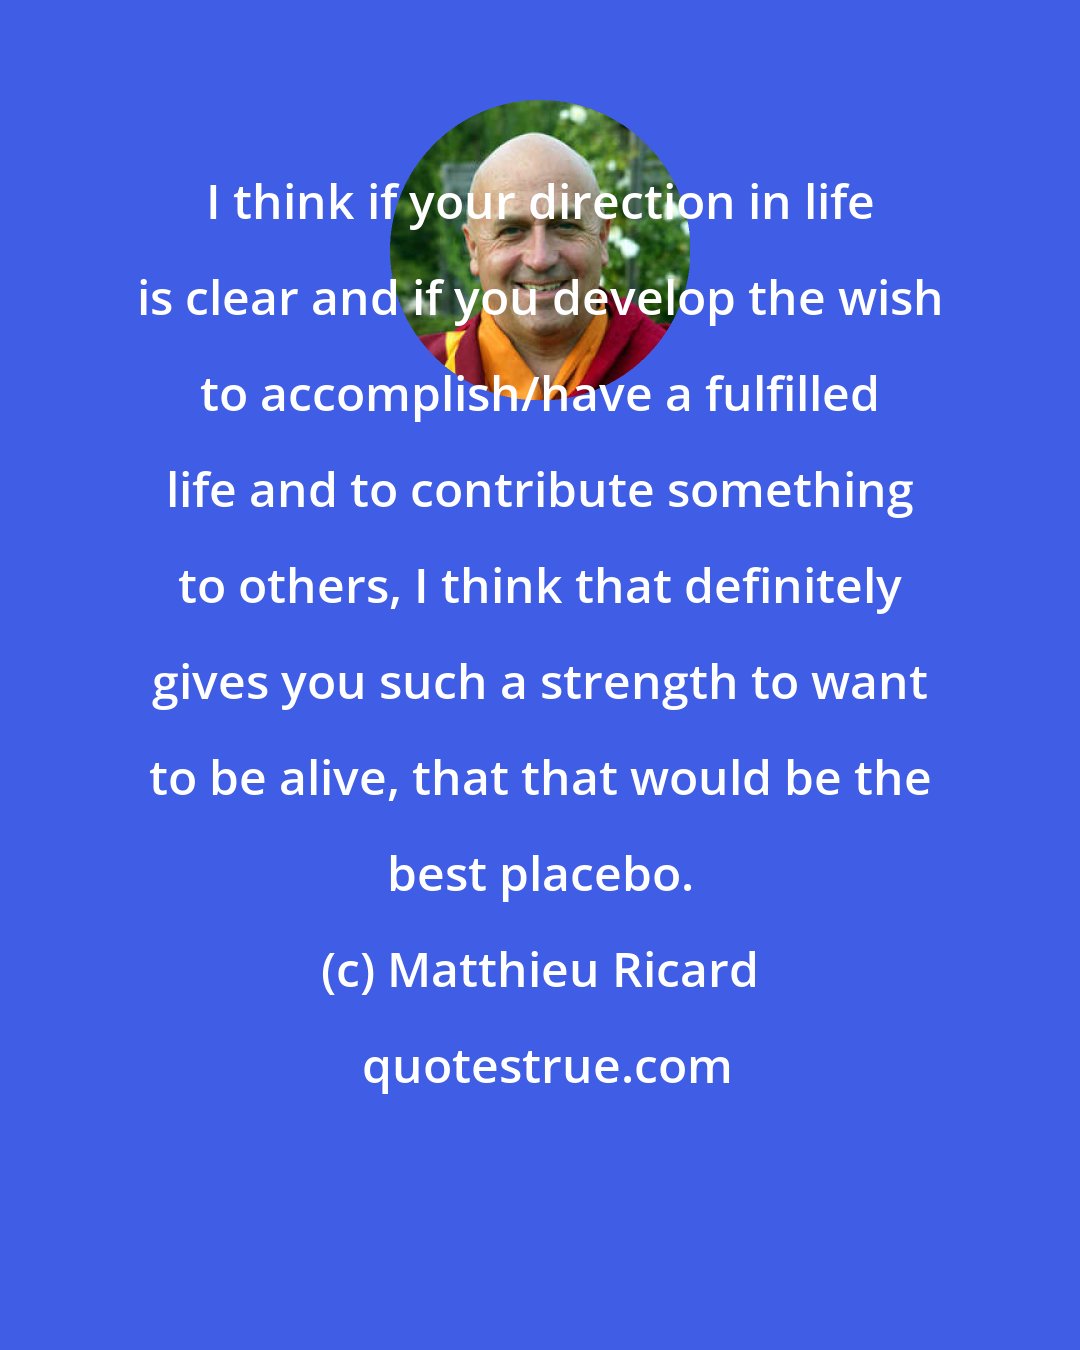 Matthieu Ricard: I think if your direction in life is clear and if you develop the wish to accomplish/have a fulfilled life and to contribute something to others, I think that definitely gives you such a strength to want to be alive, that that would be the best placebo.